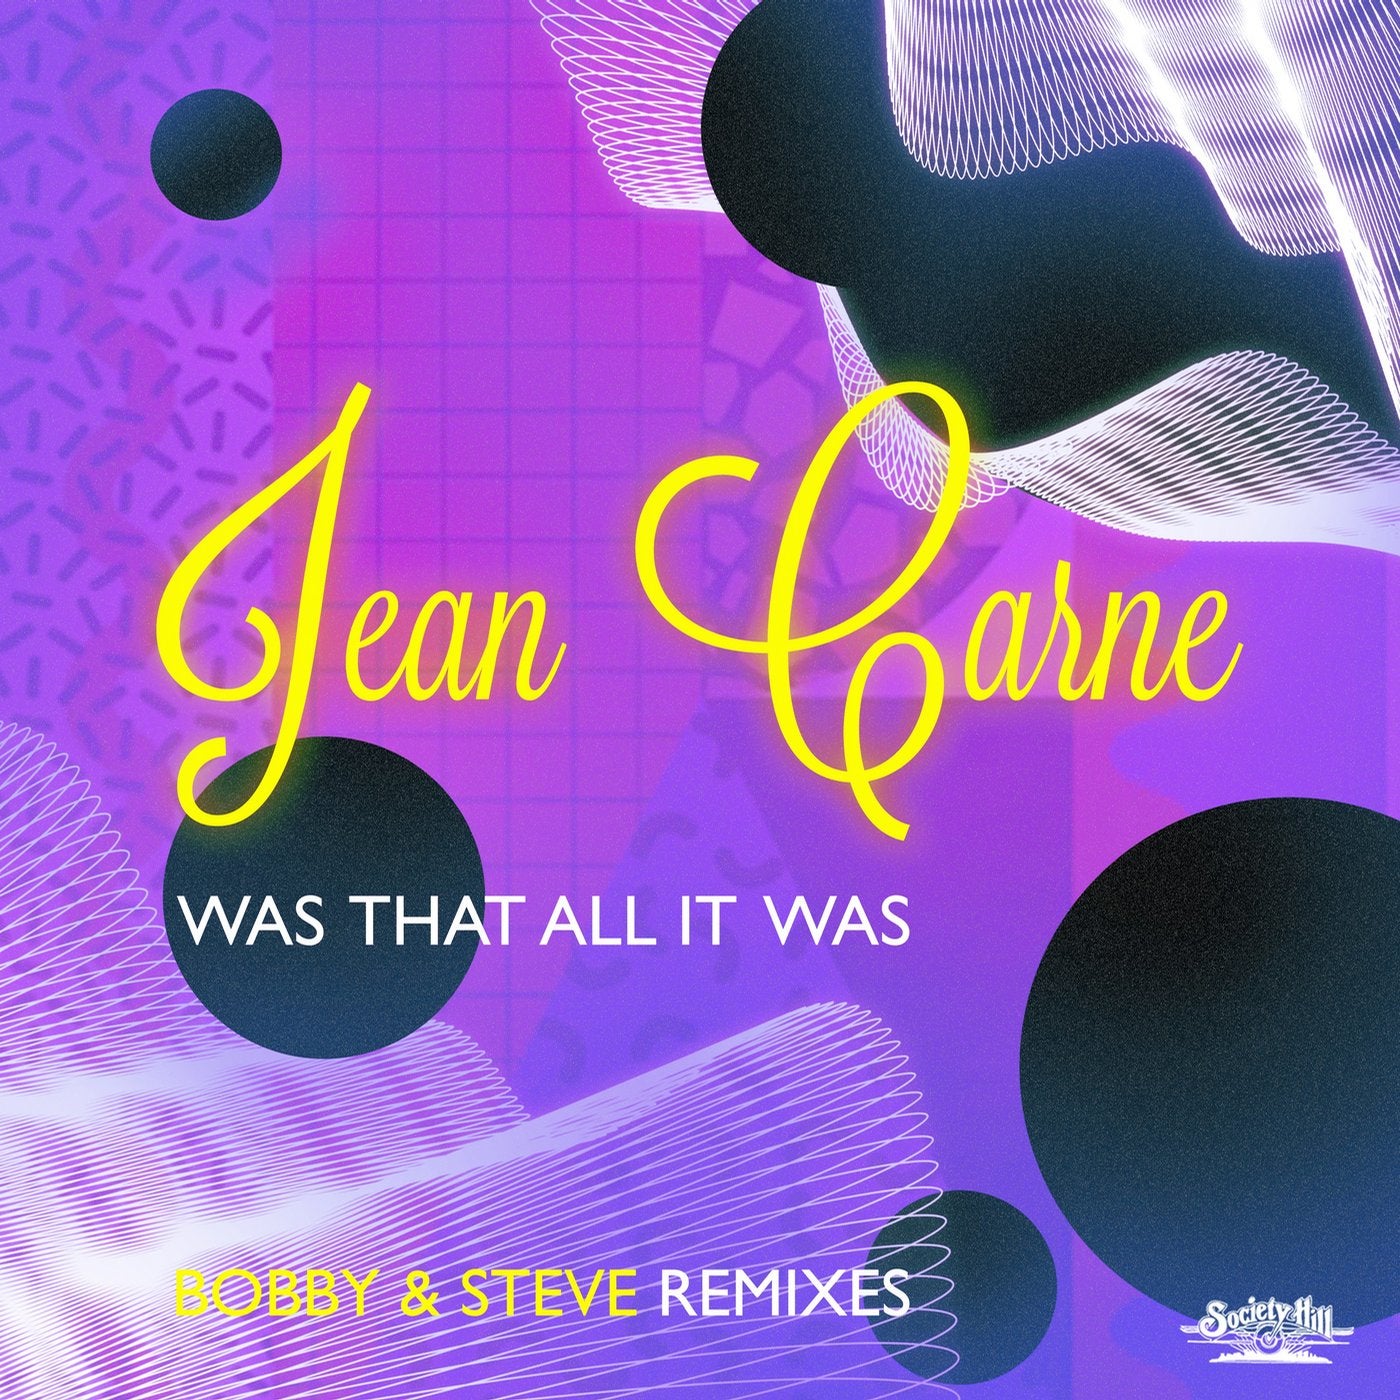 Was That All It Was - Bobby & Steve Remixes